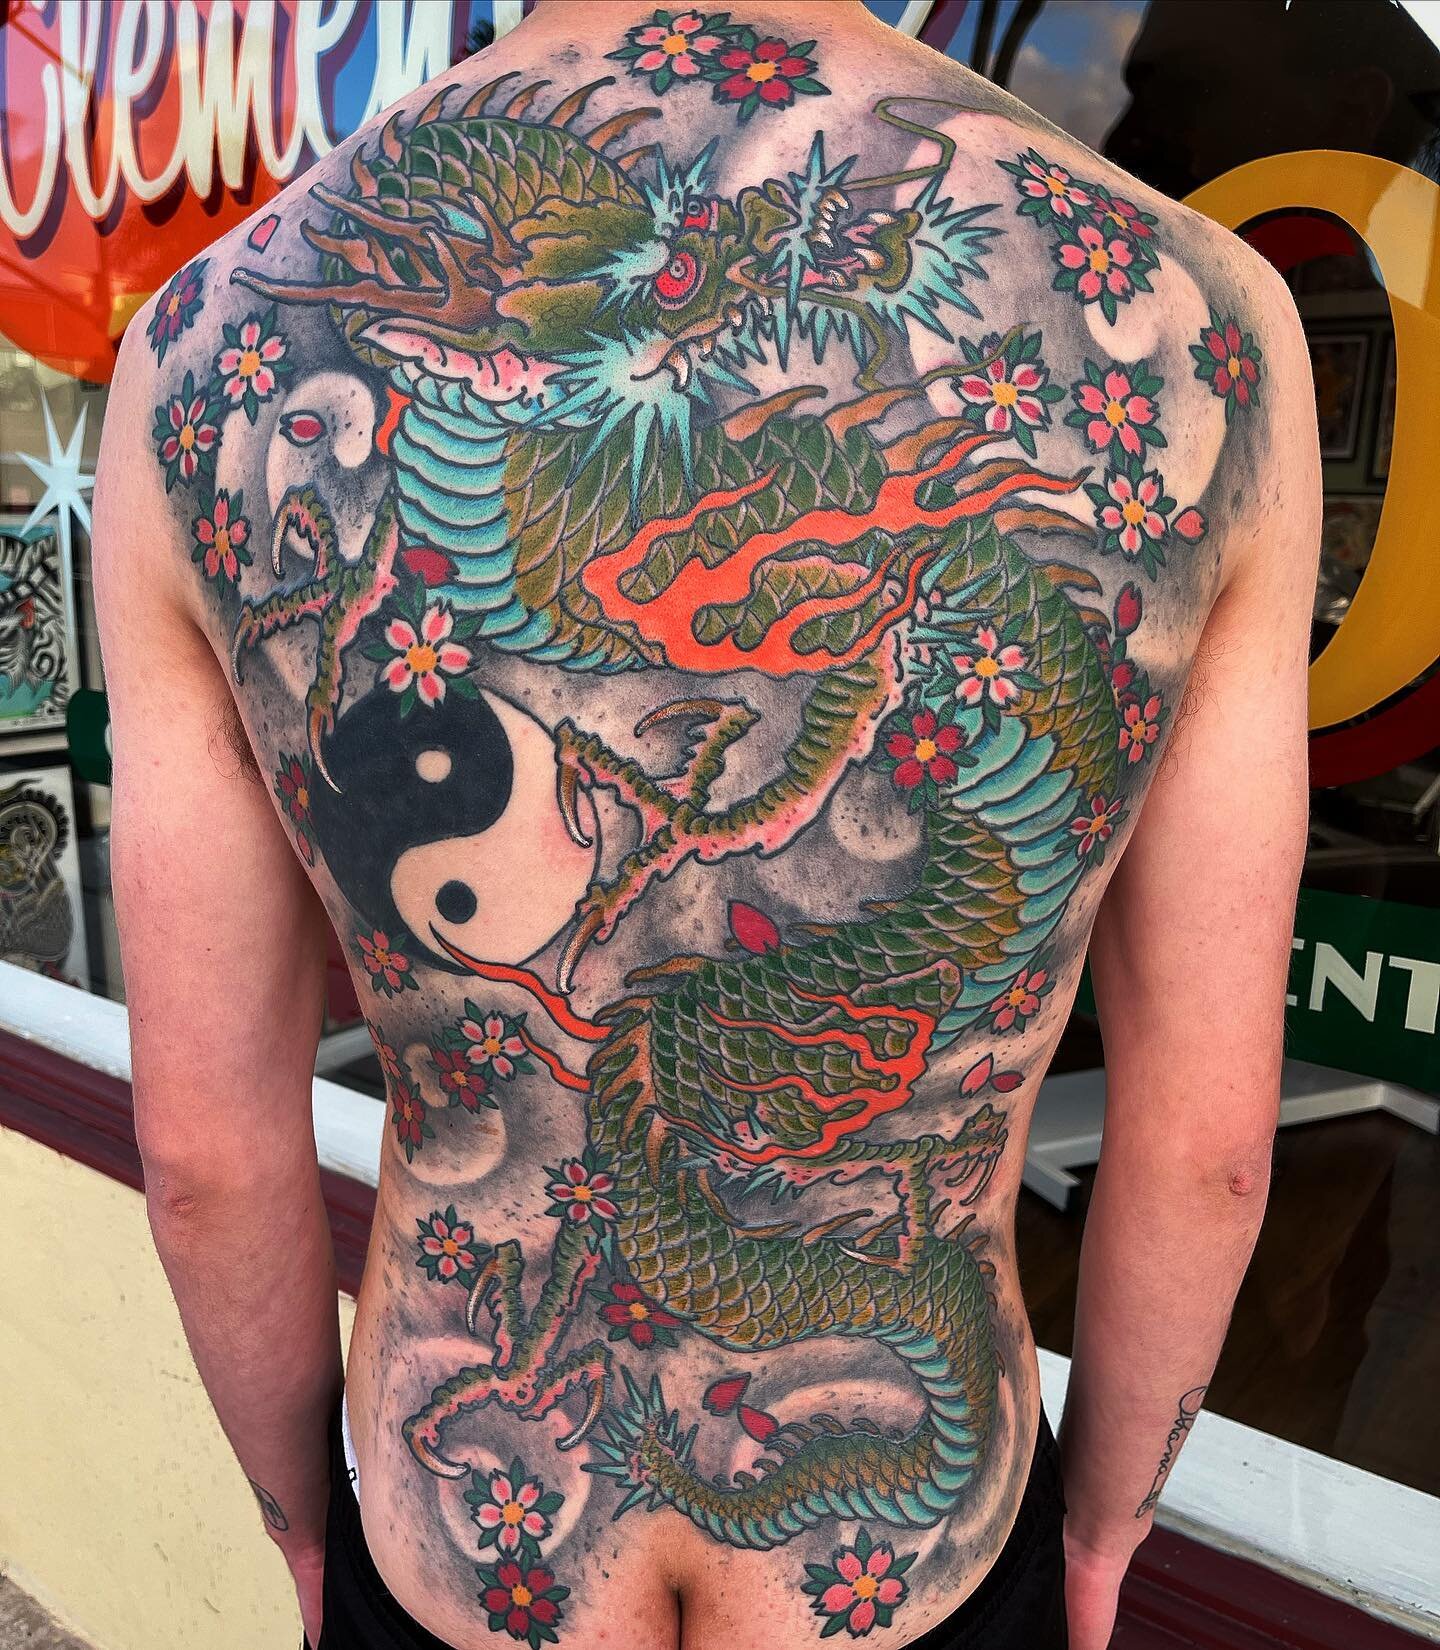 Here&rsquo;s a one off Japanese dragon and blossom backpiece @kd1904 finished up over the weekend on Jonathan.  Kurt loves to do Japanese styled large scale tattoos! Come get one! clementinetattoo.com #clementinetattoo #clementine #sandiegotattooshop